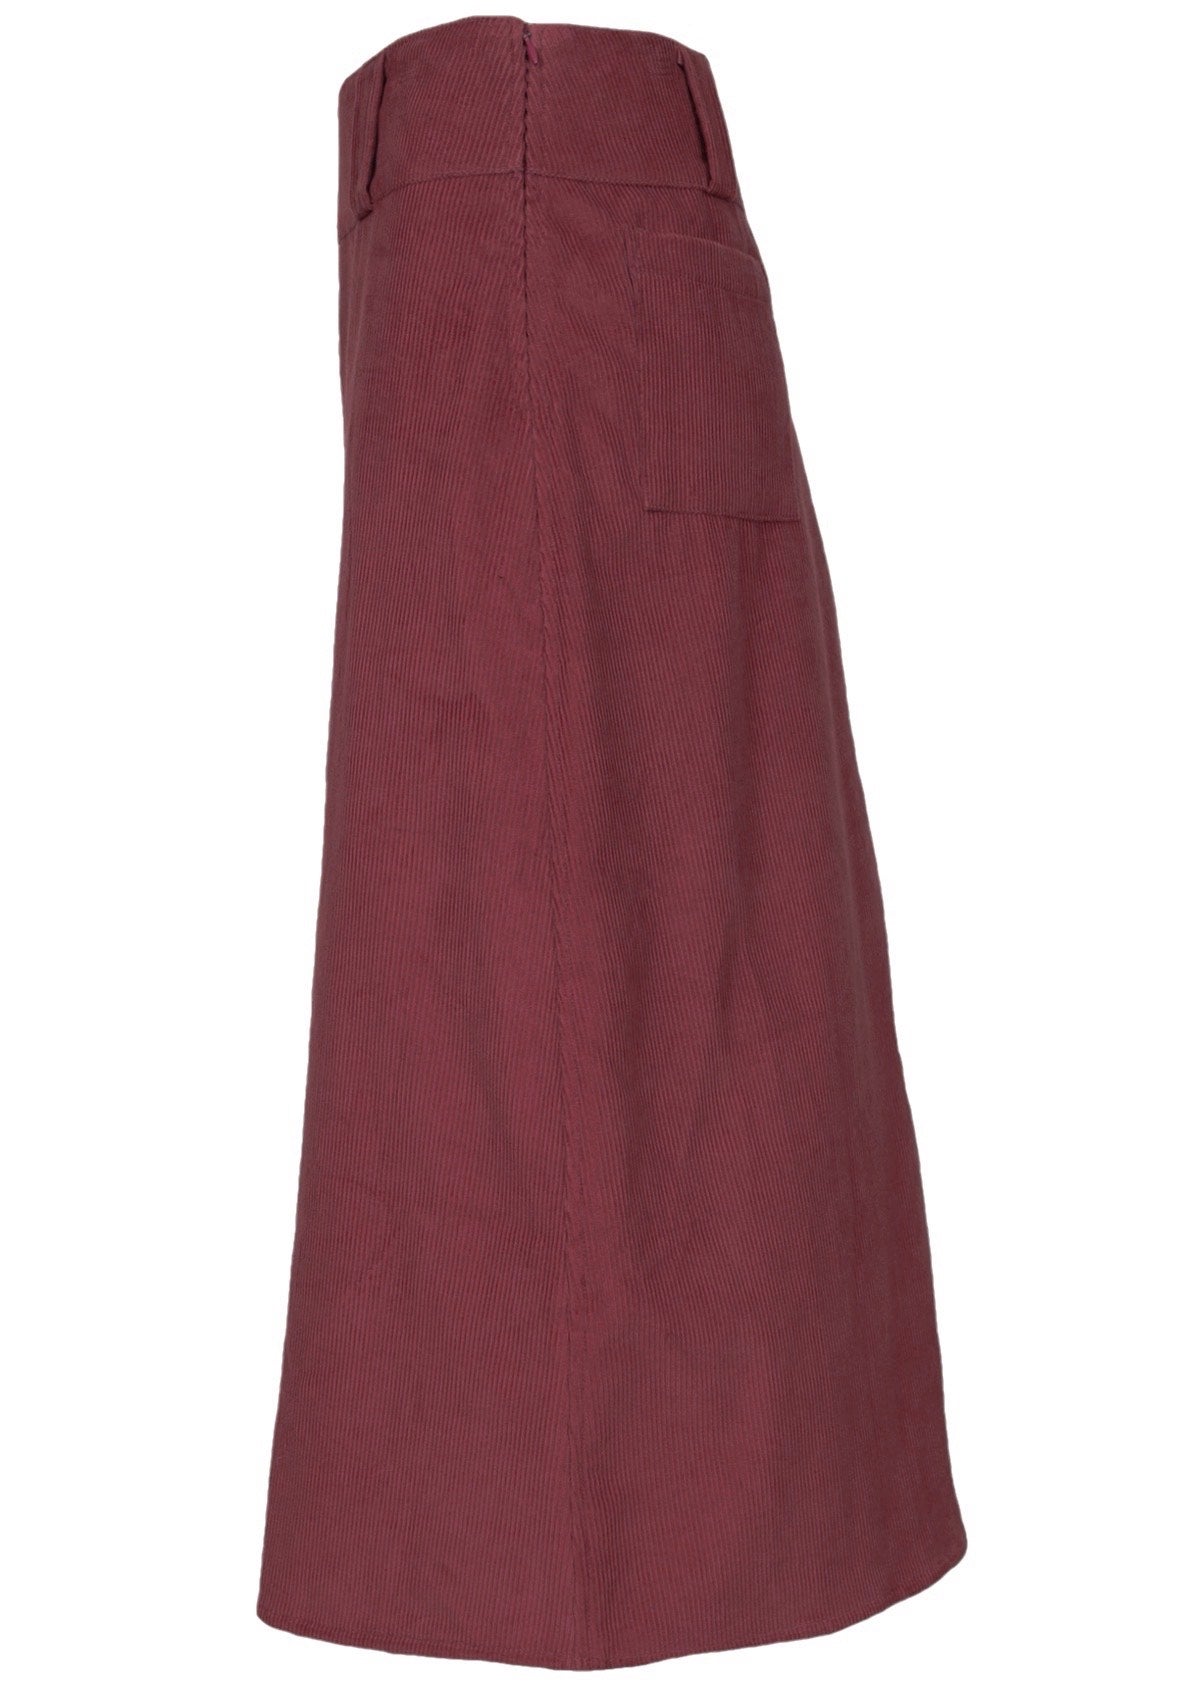 100% cotton corduroy skirt ends at the shin and has belt loops. 